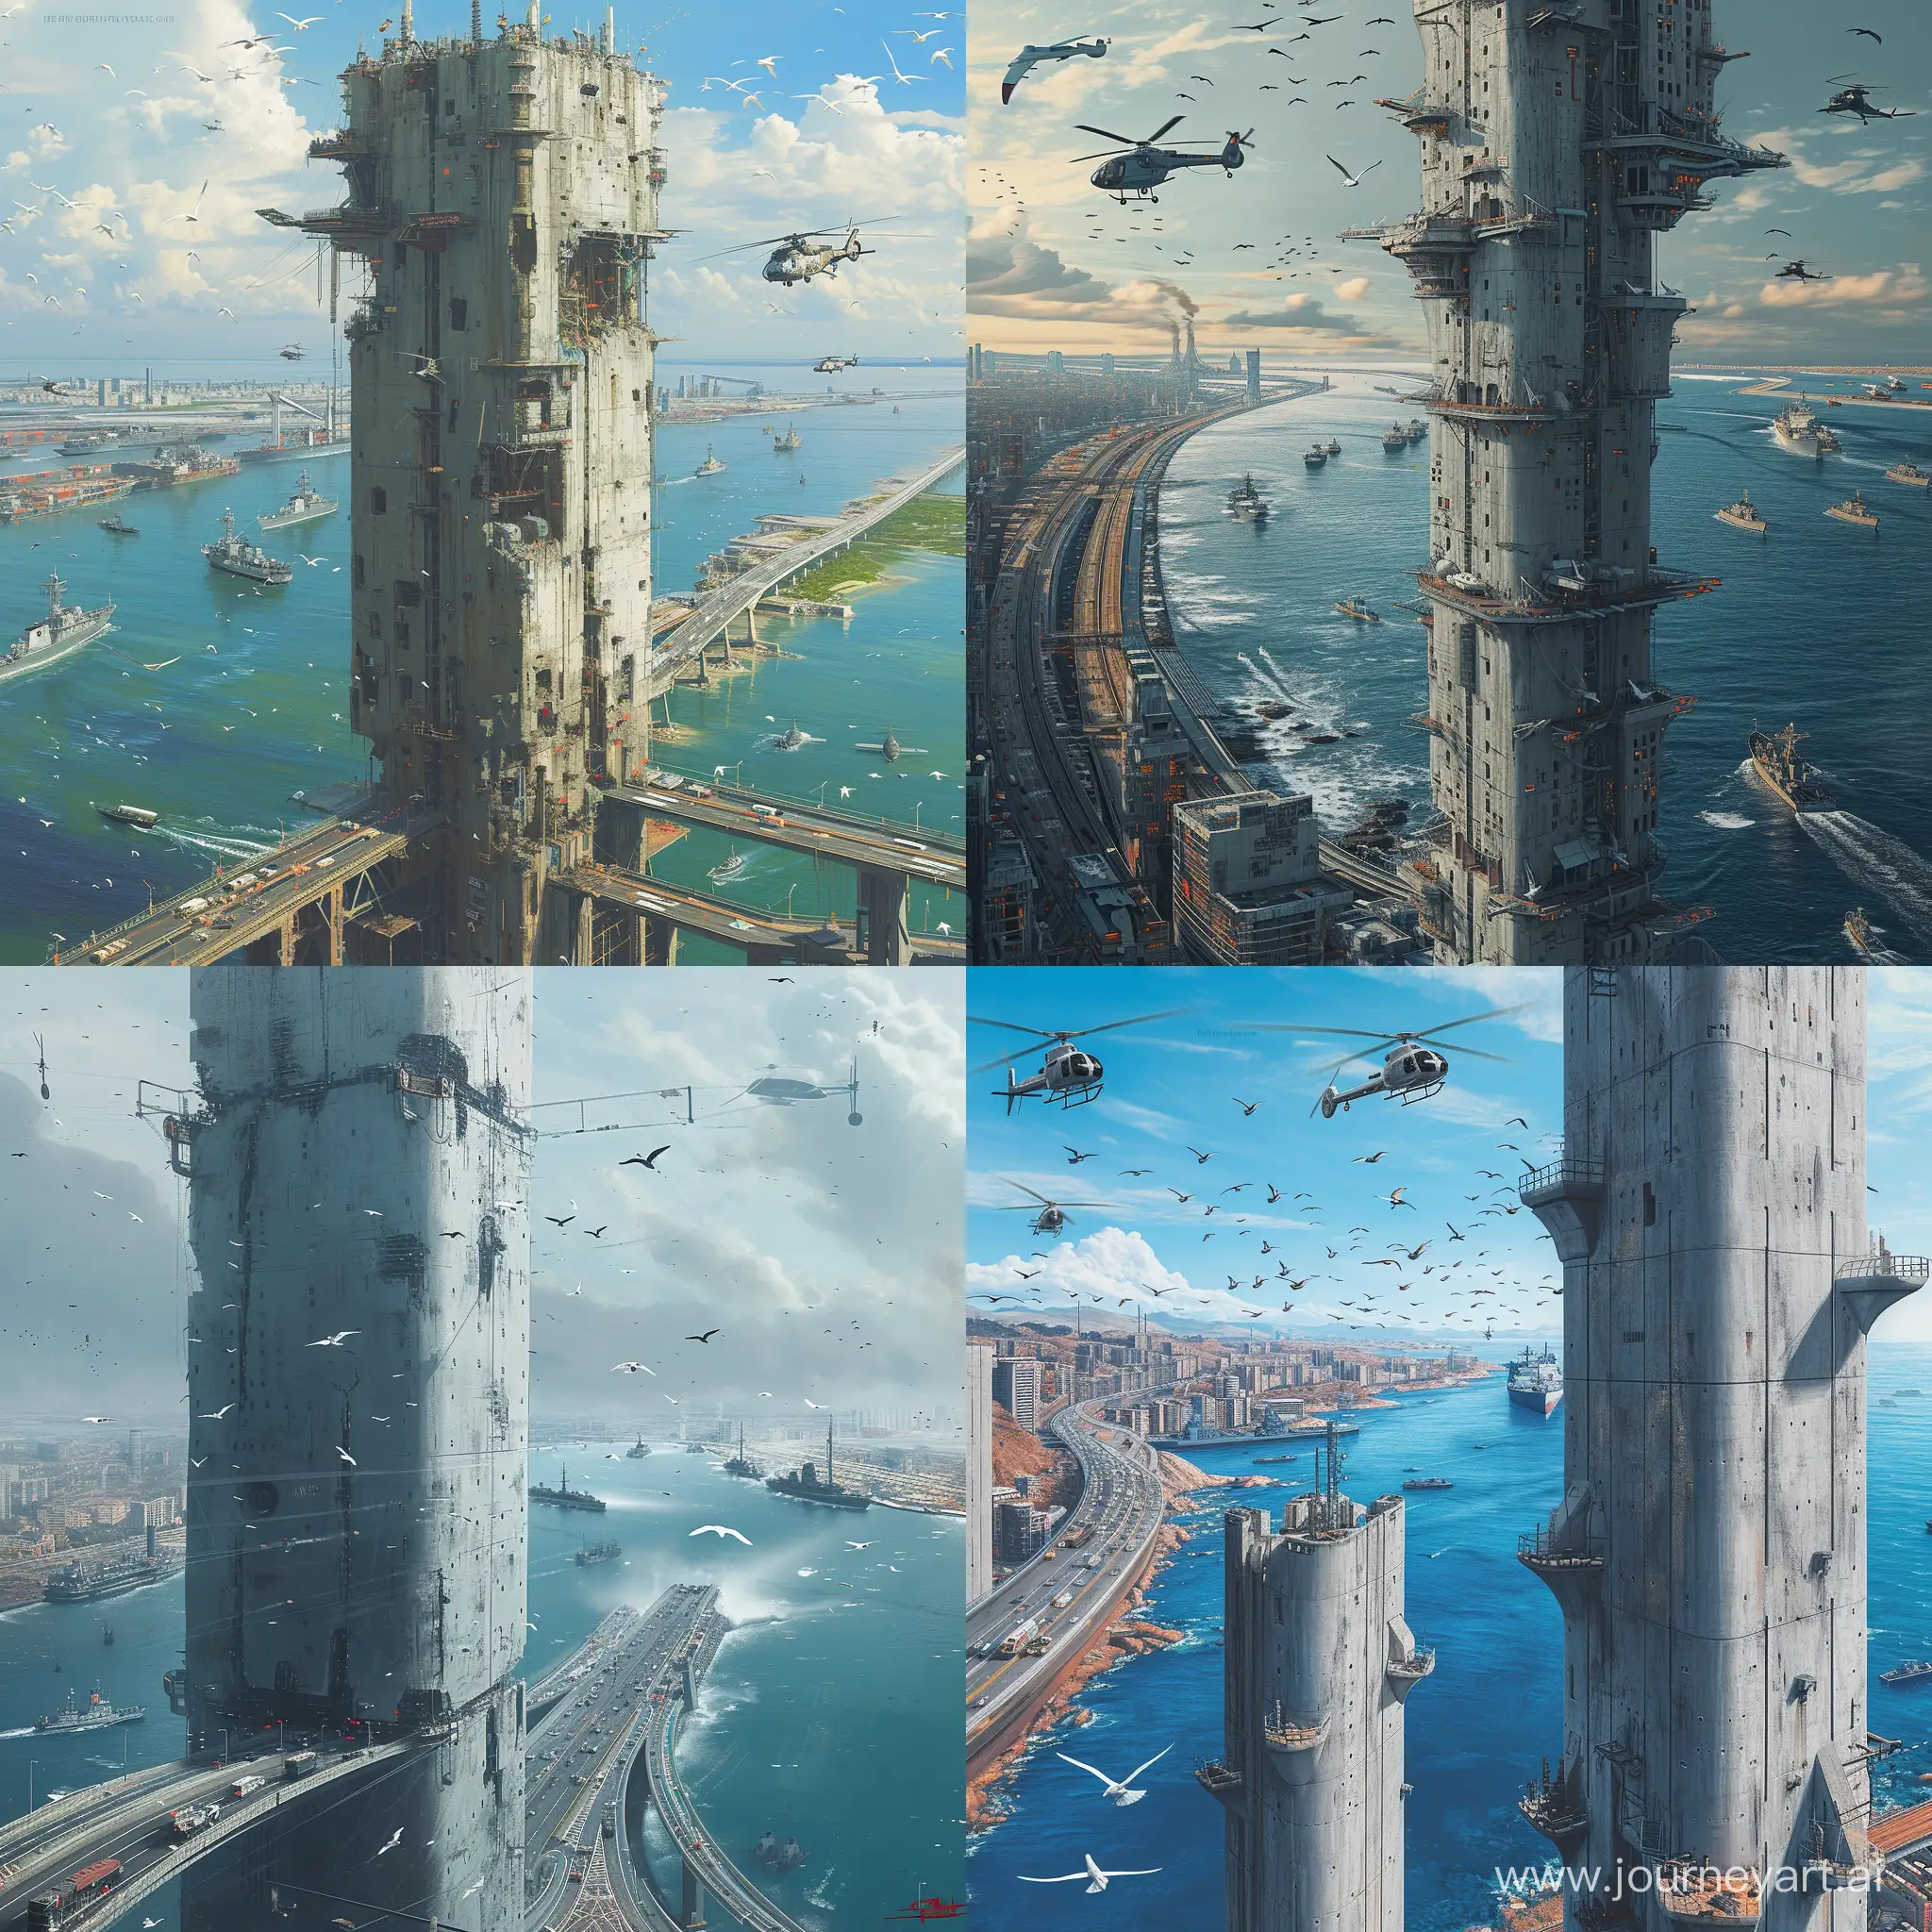 Futuristic-Cyberpunk-Cityscape-with-Towers-Highways-and-Warships